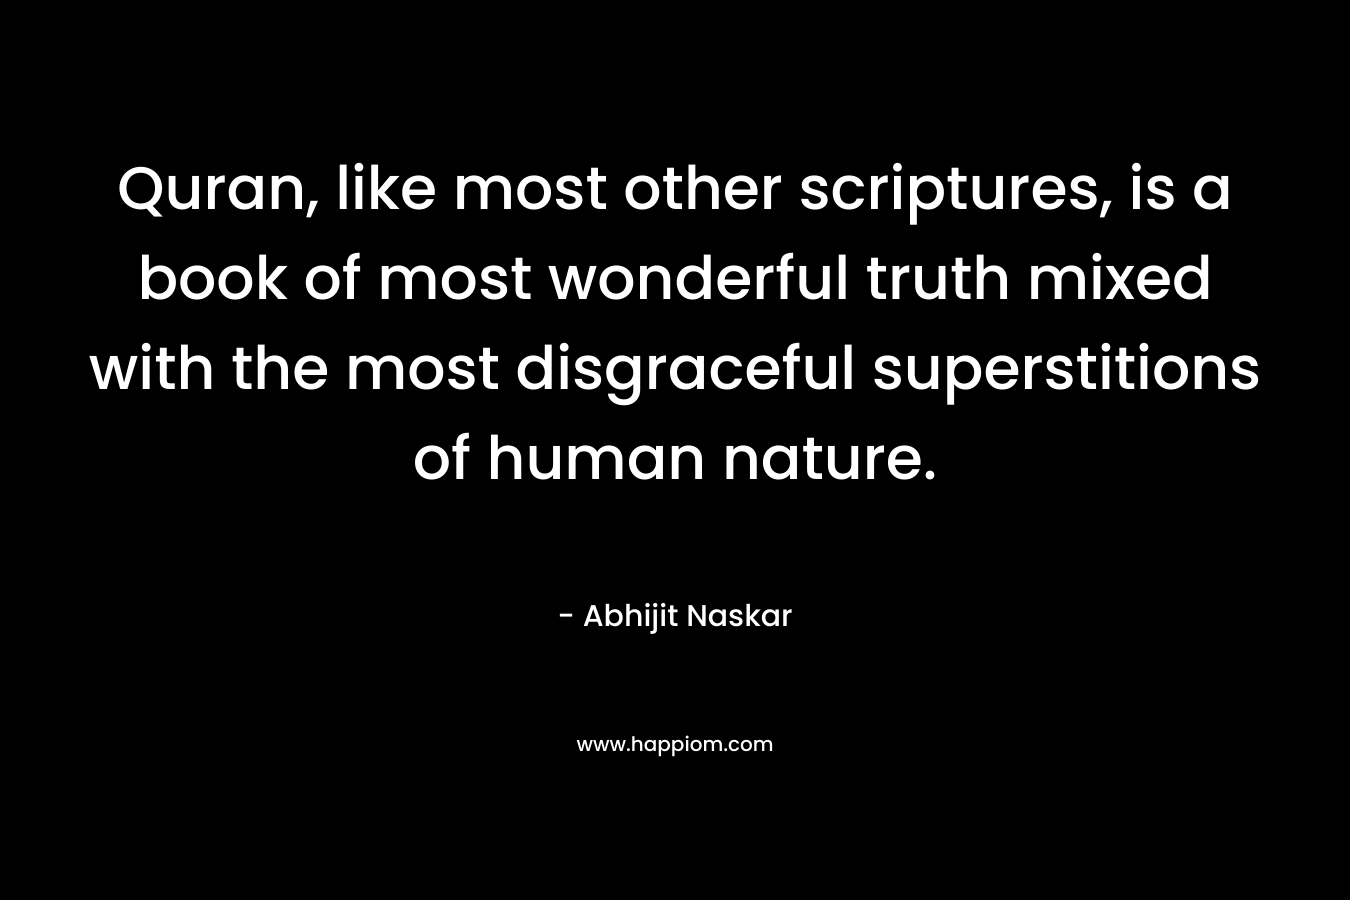 Quran, like most other scriptures, is a book of most wonderful truth mixed with the most disgraceful superstitions of human nature. – Abhijit Naskar